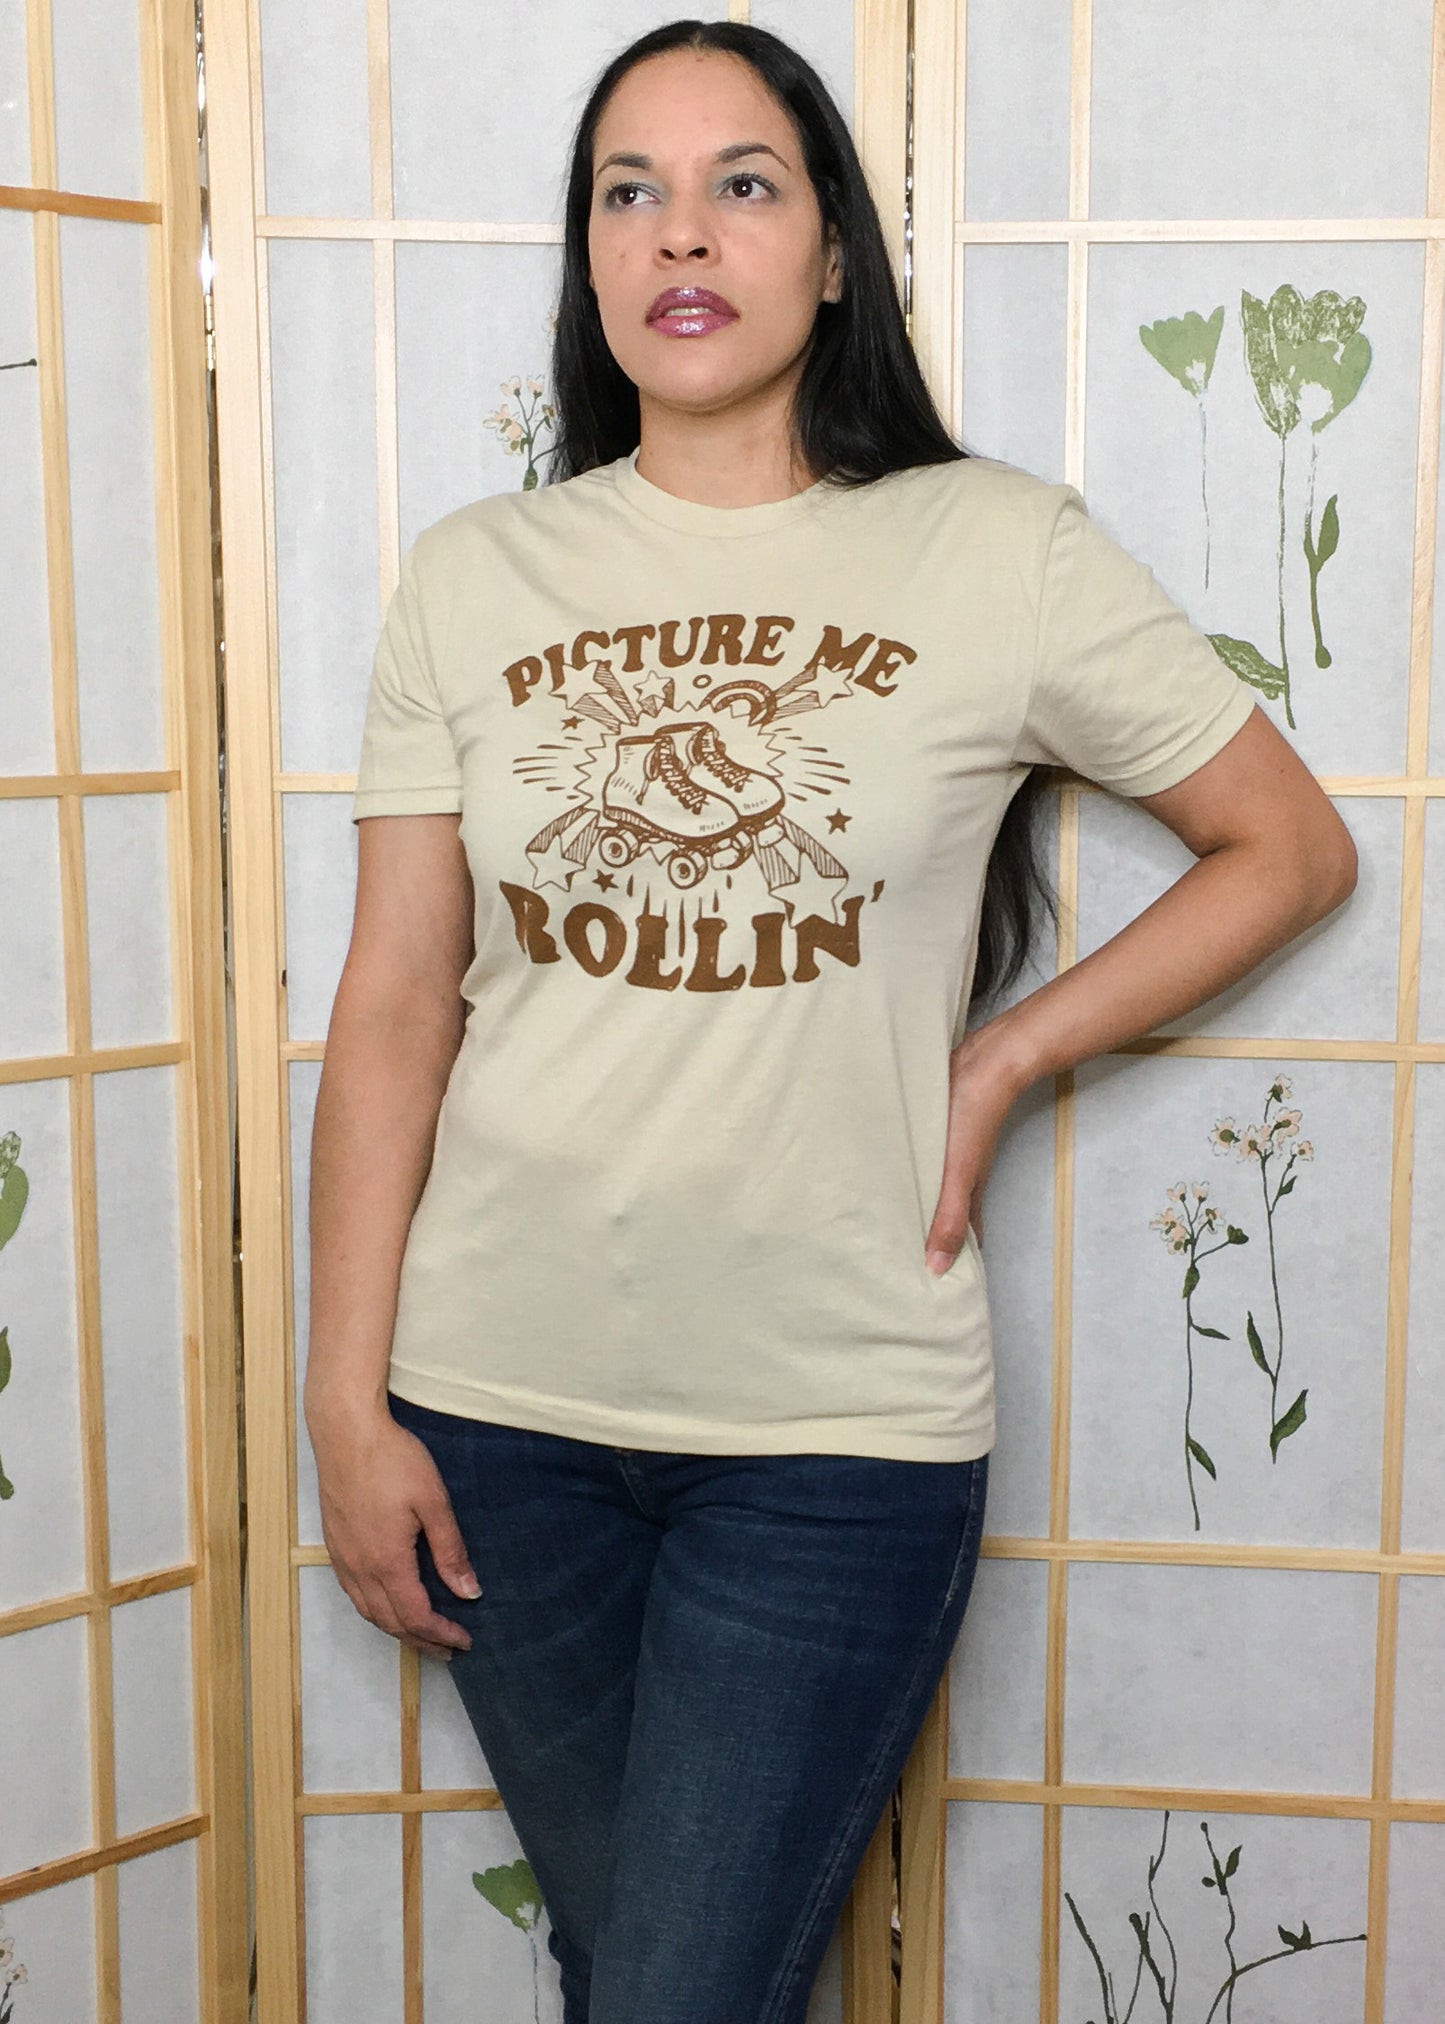 Picture Me Rollin' Graphic Tee